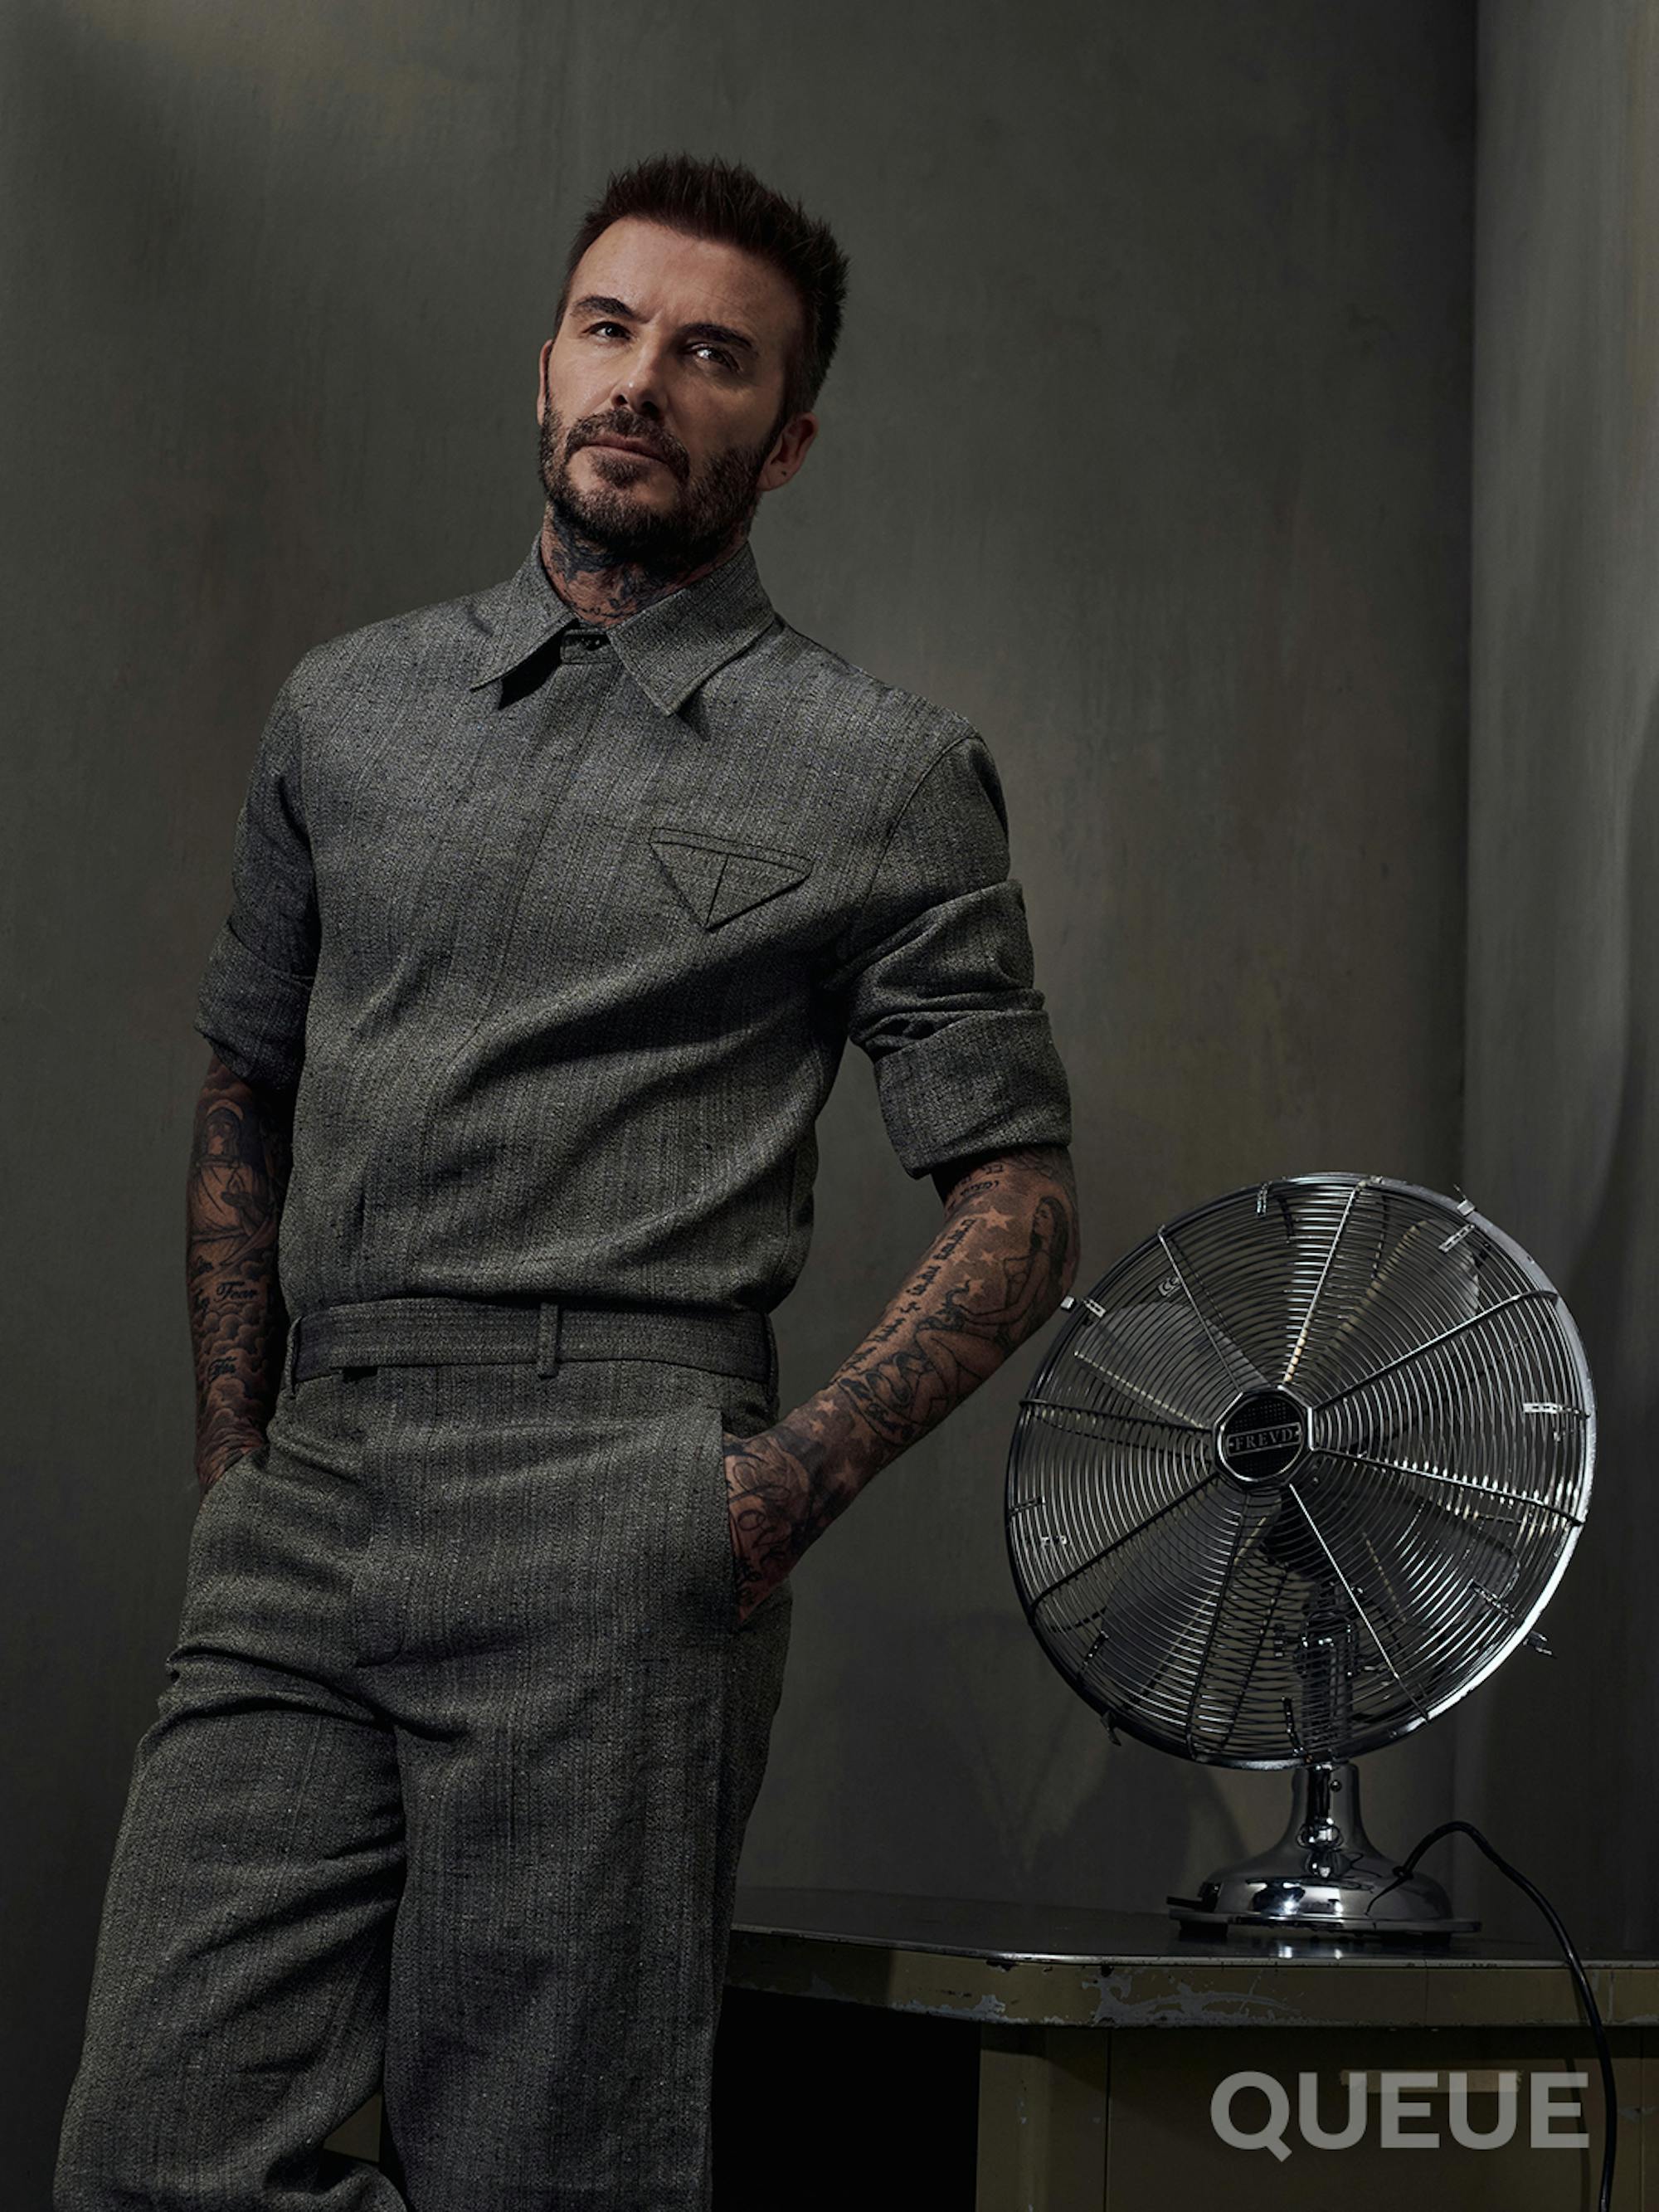 David Beckham wears all gray and stands next to a fan in a gray-walled room. 